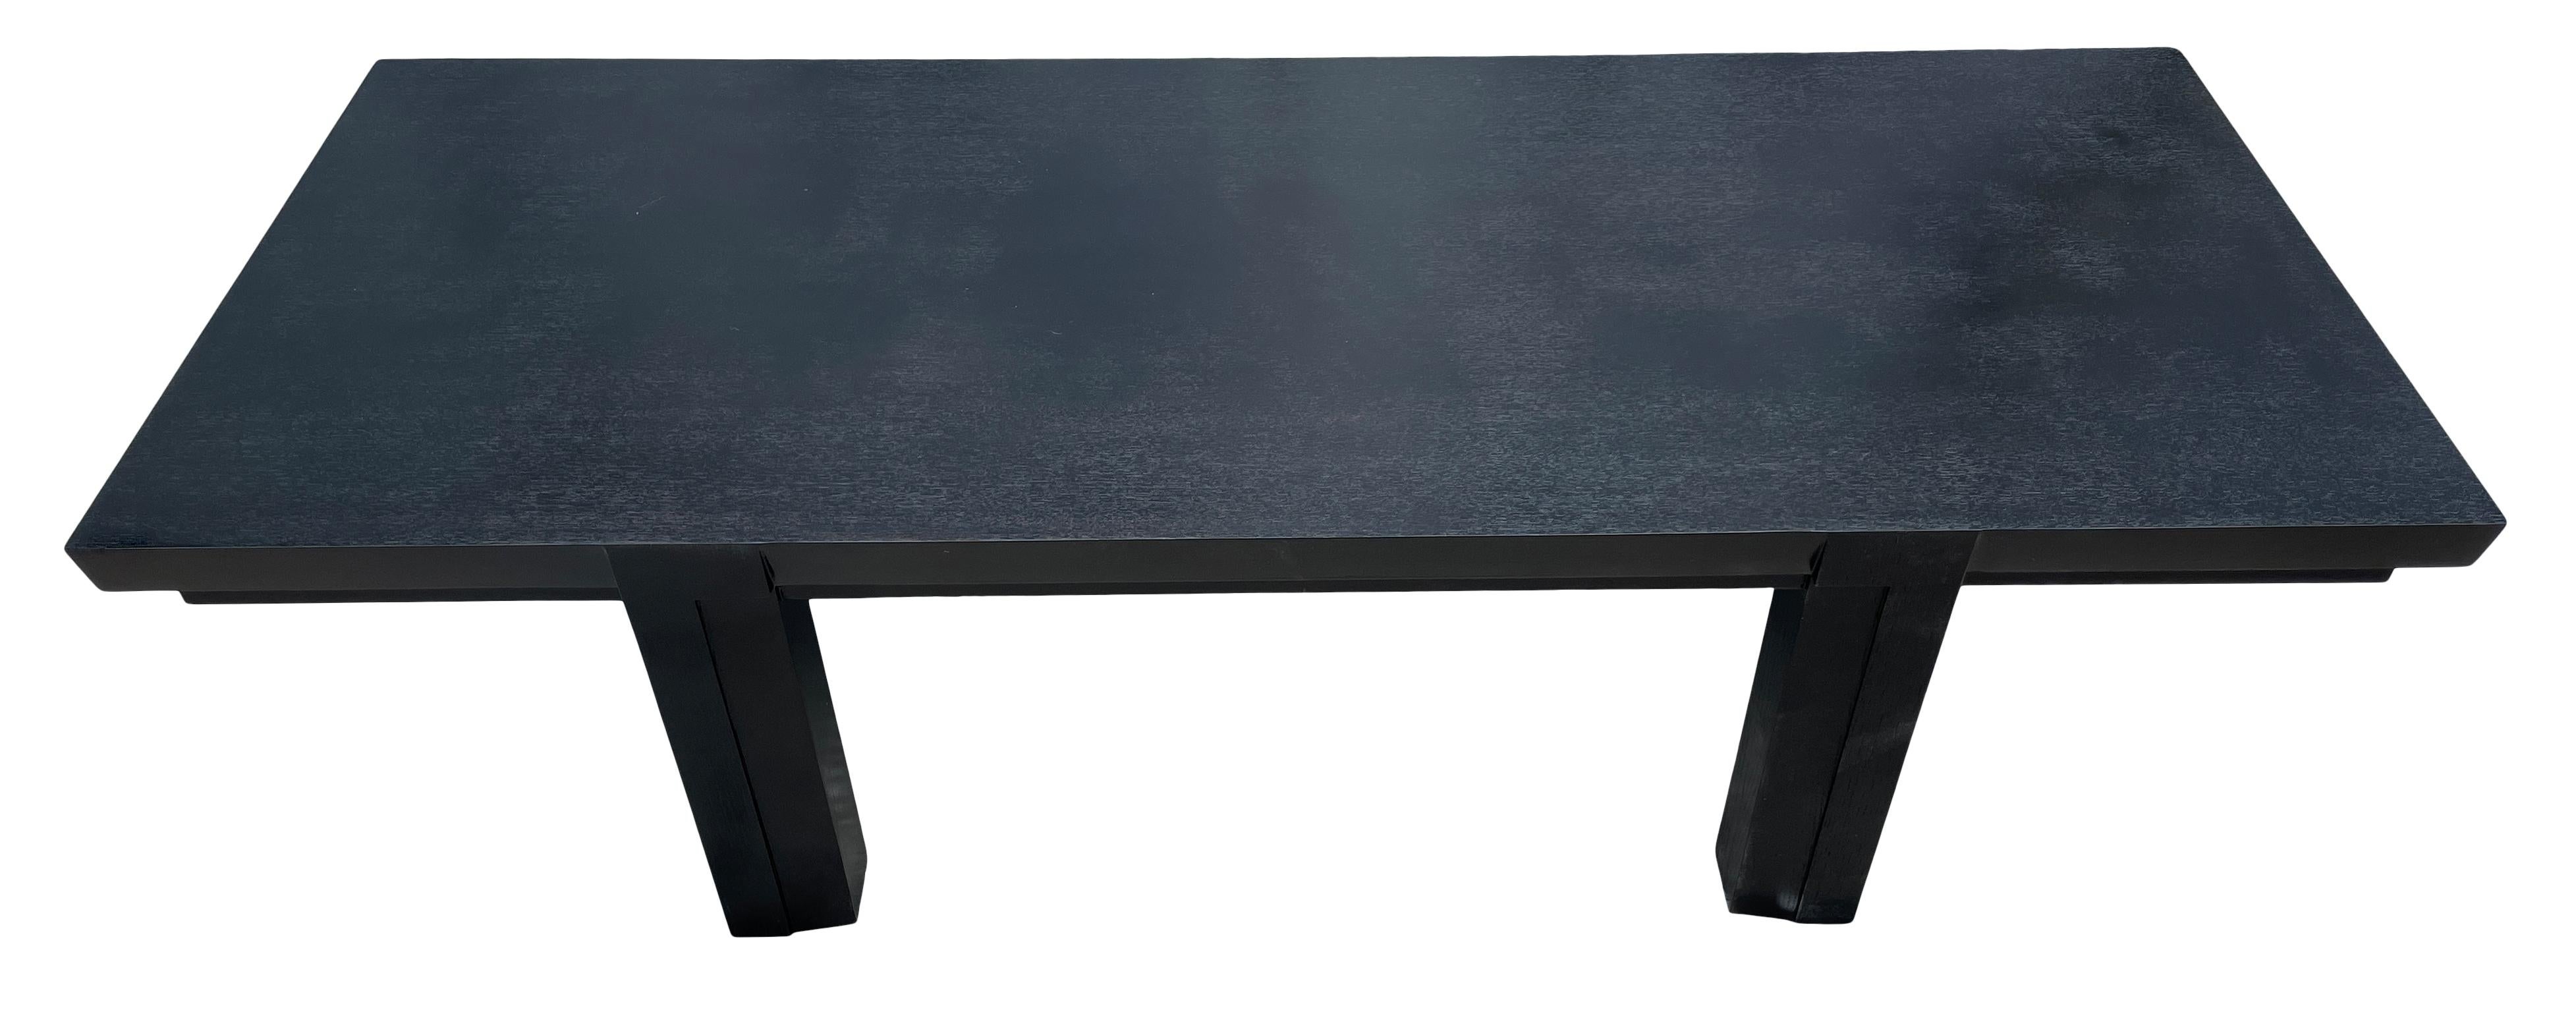 Mid-Century Modern custom solid birch coffee table bench black lacquer. Very Heavy solid wood Coffee table or bench. All Black Custom Made. Located in Brooklyn NYC.